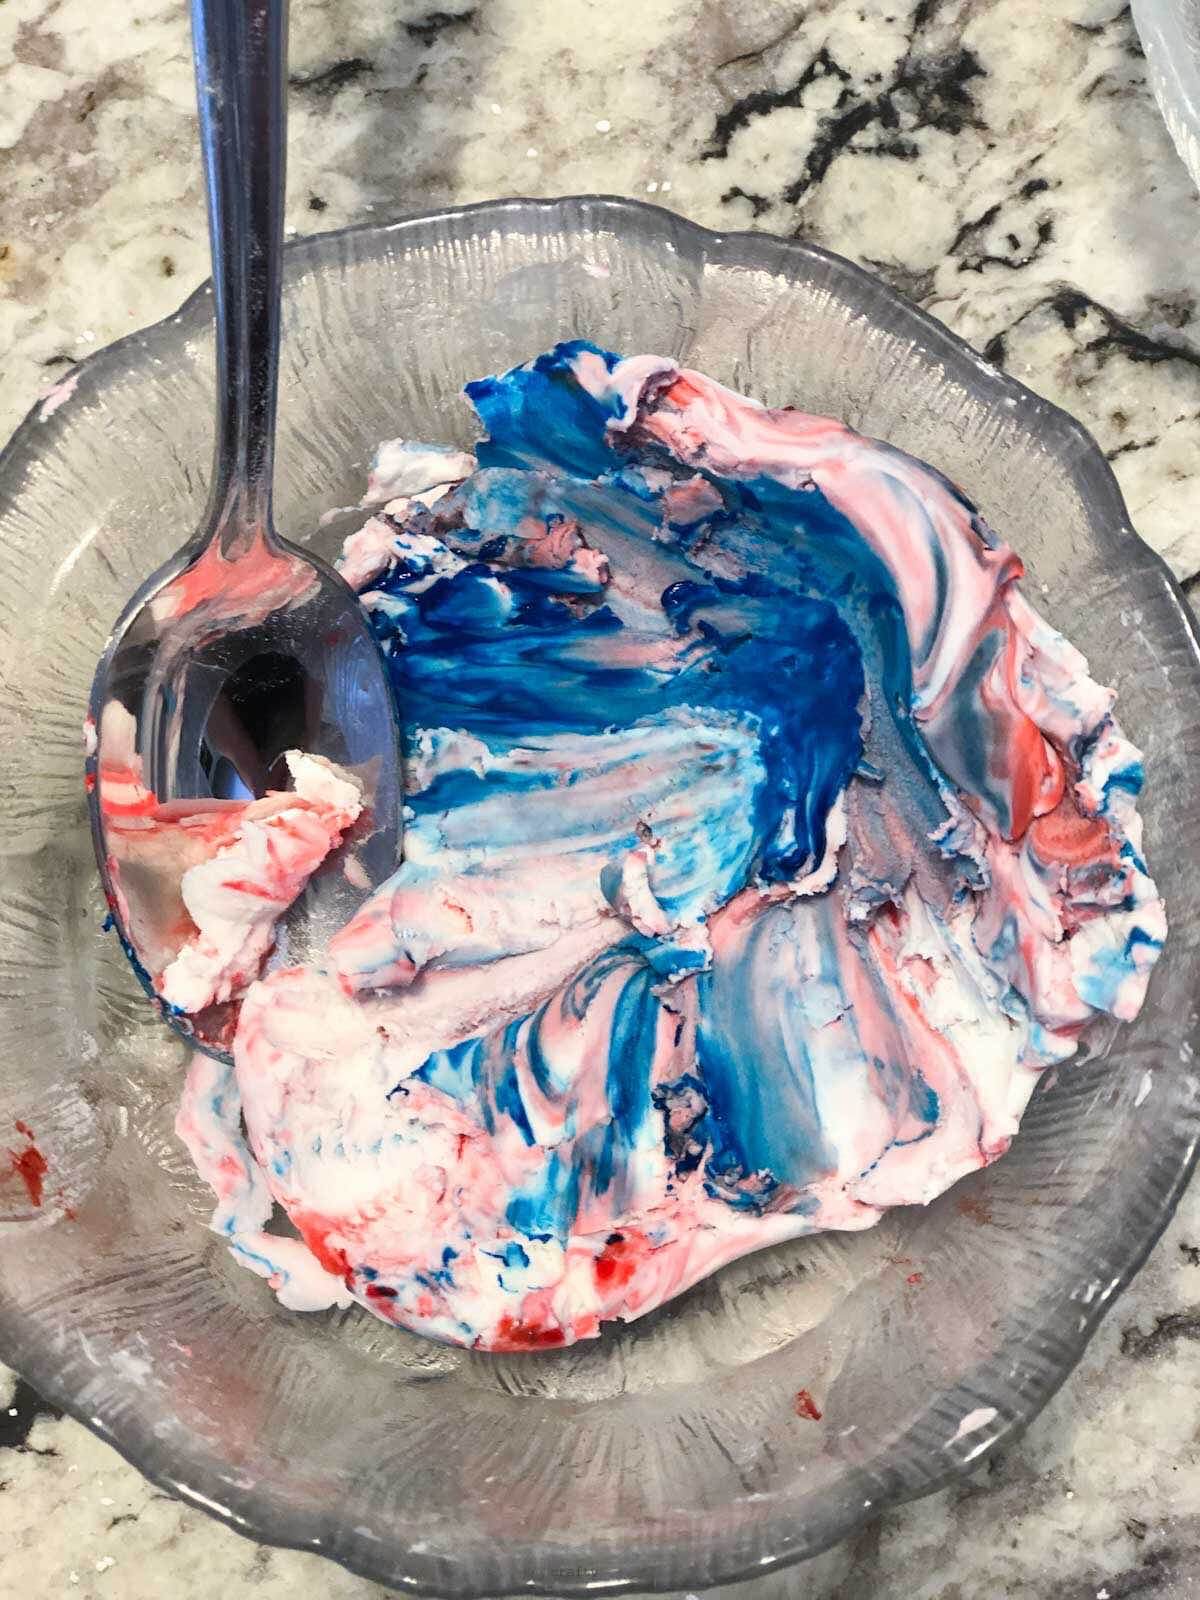 blue and red tie dye looking homemade playdough in small glass bowl.